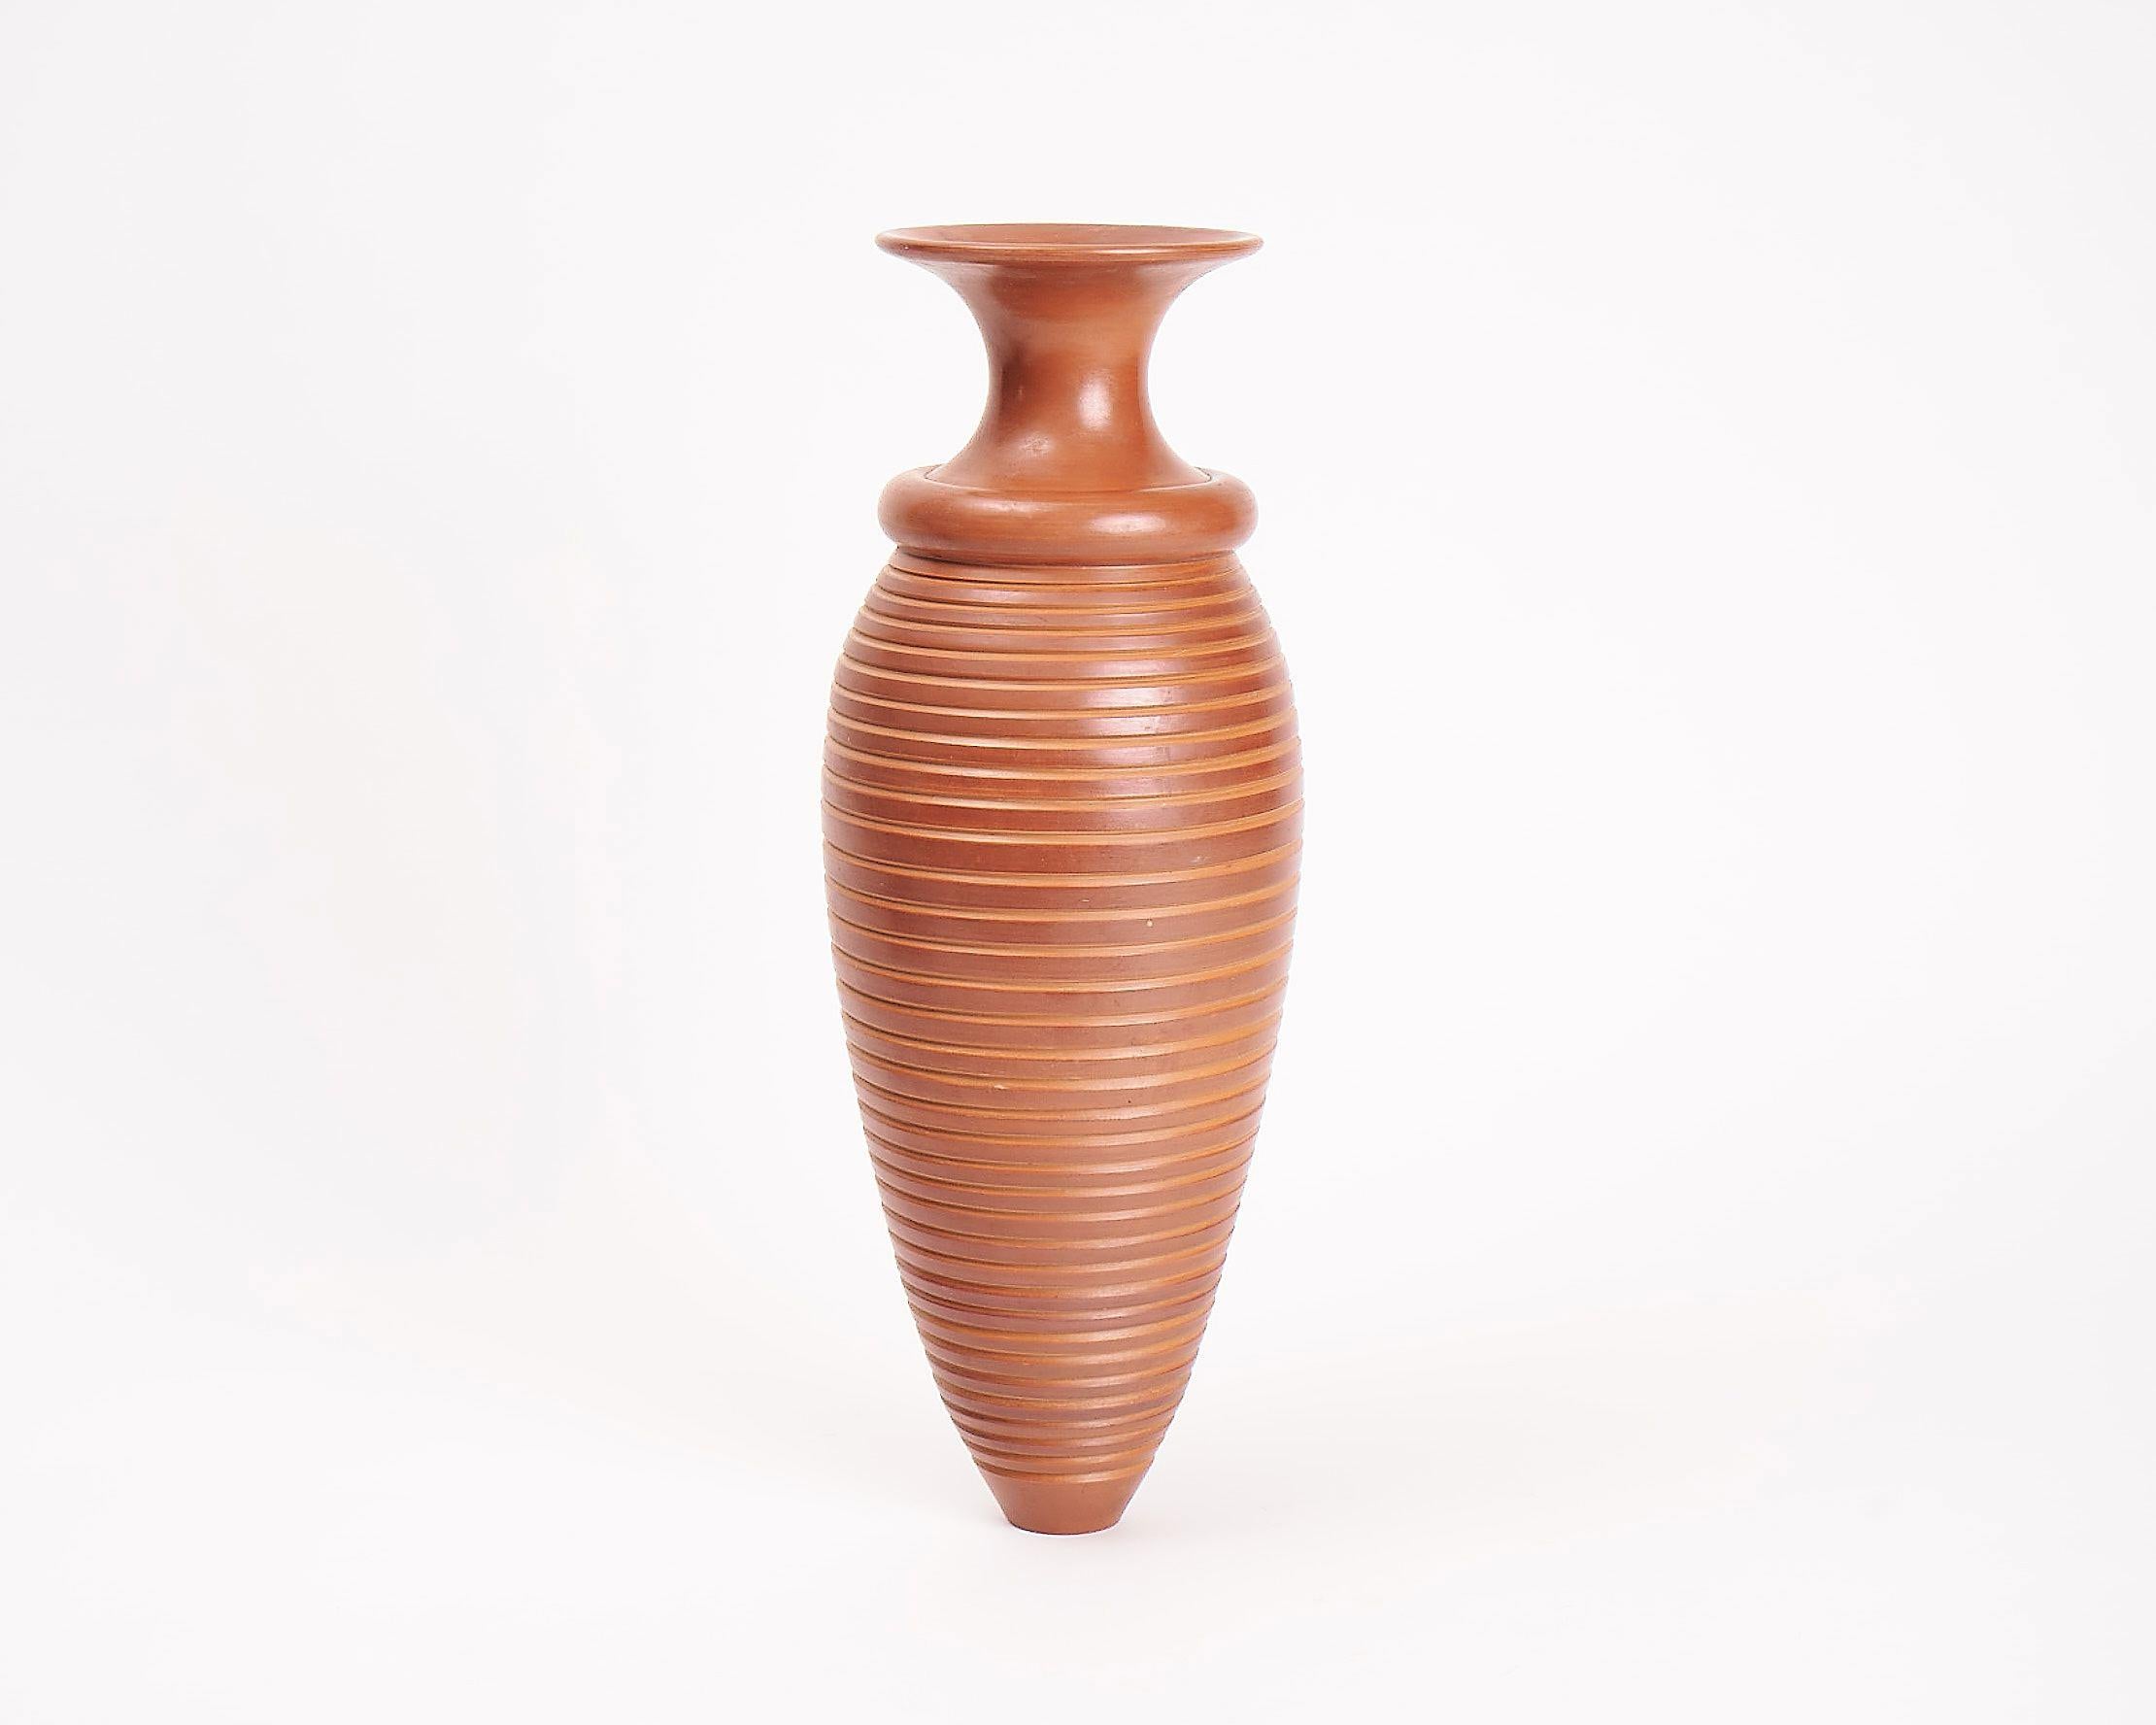 The glazed terracotta pots of Françoise Blondeau and AÏt Lhaj Hassan possess a symmetry and balance that pits their natural, earthy medium against an elegant beauty specific to man-made objects.